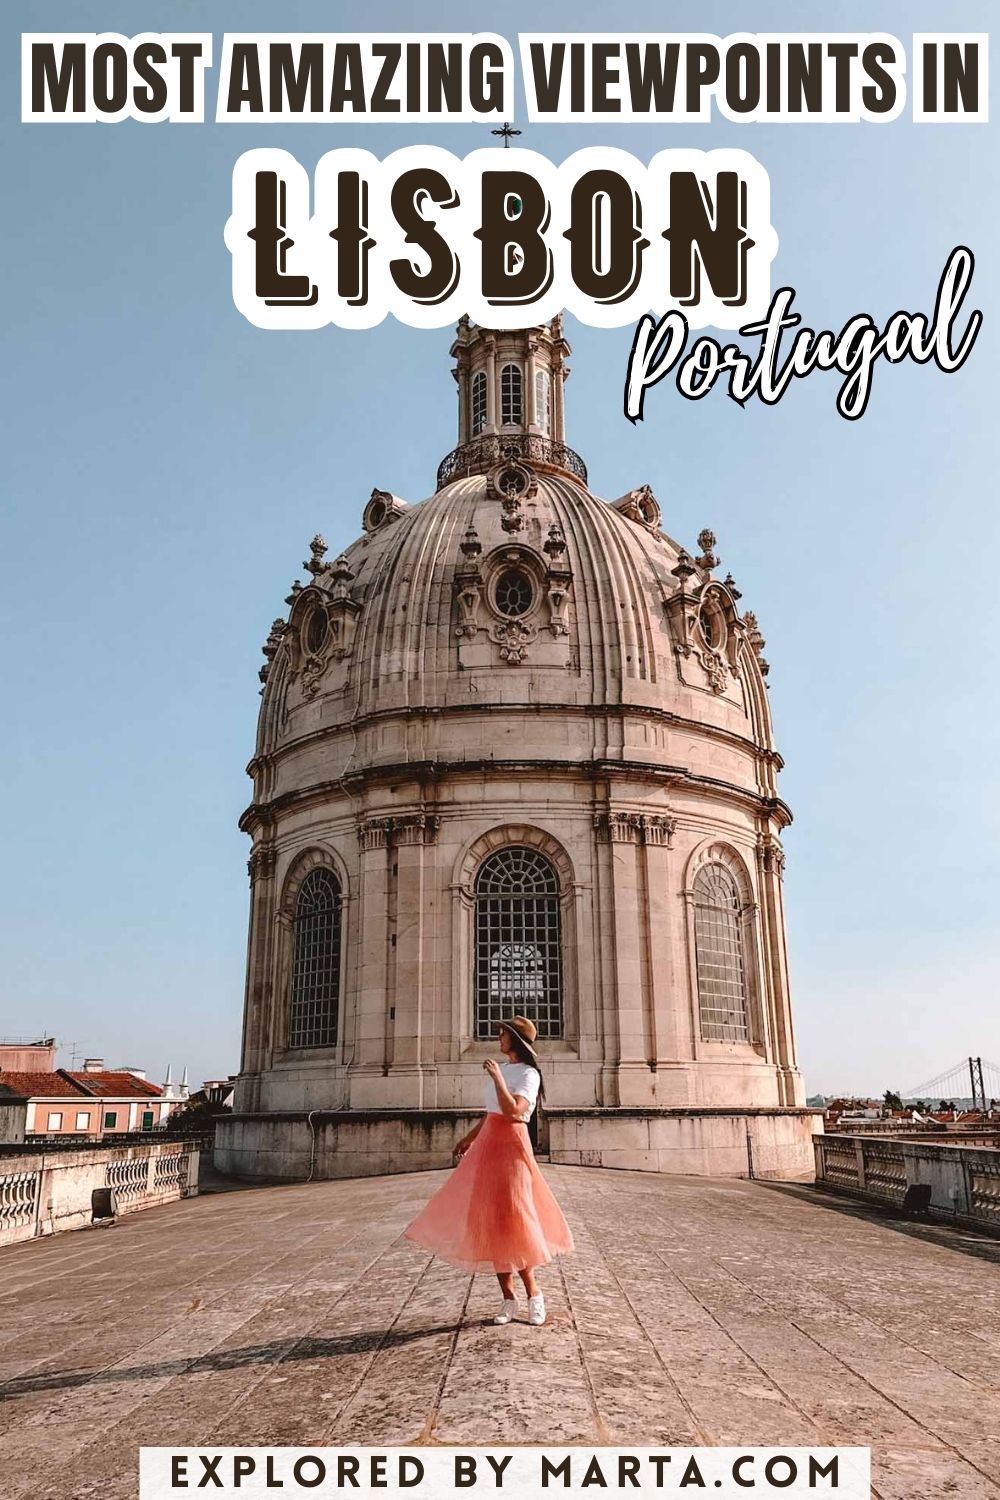 Best viewpoints and magical rooftops you should visit in Lisbon, Portugal